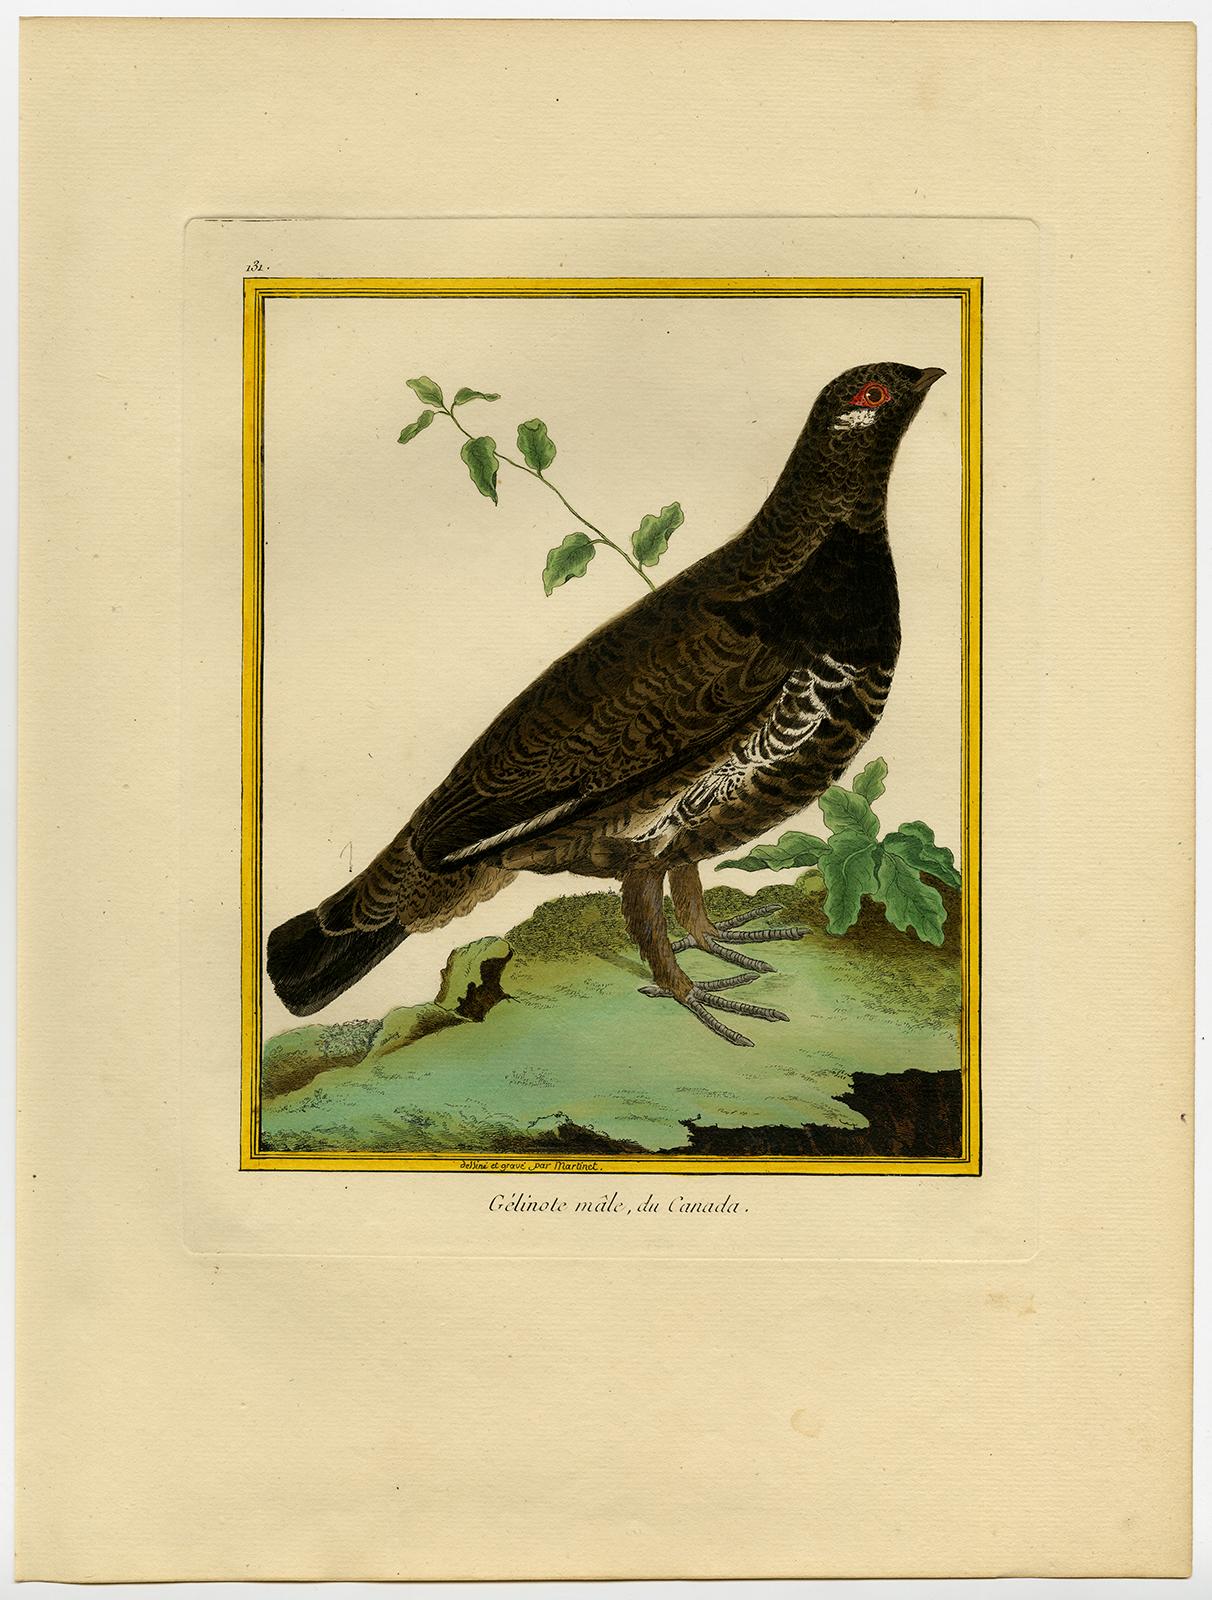 Male Red Grouse from Canada by Martinet - Handcoloured engraving - 18th century - Print by Francois Nicolas Martinet